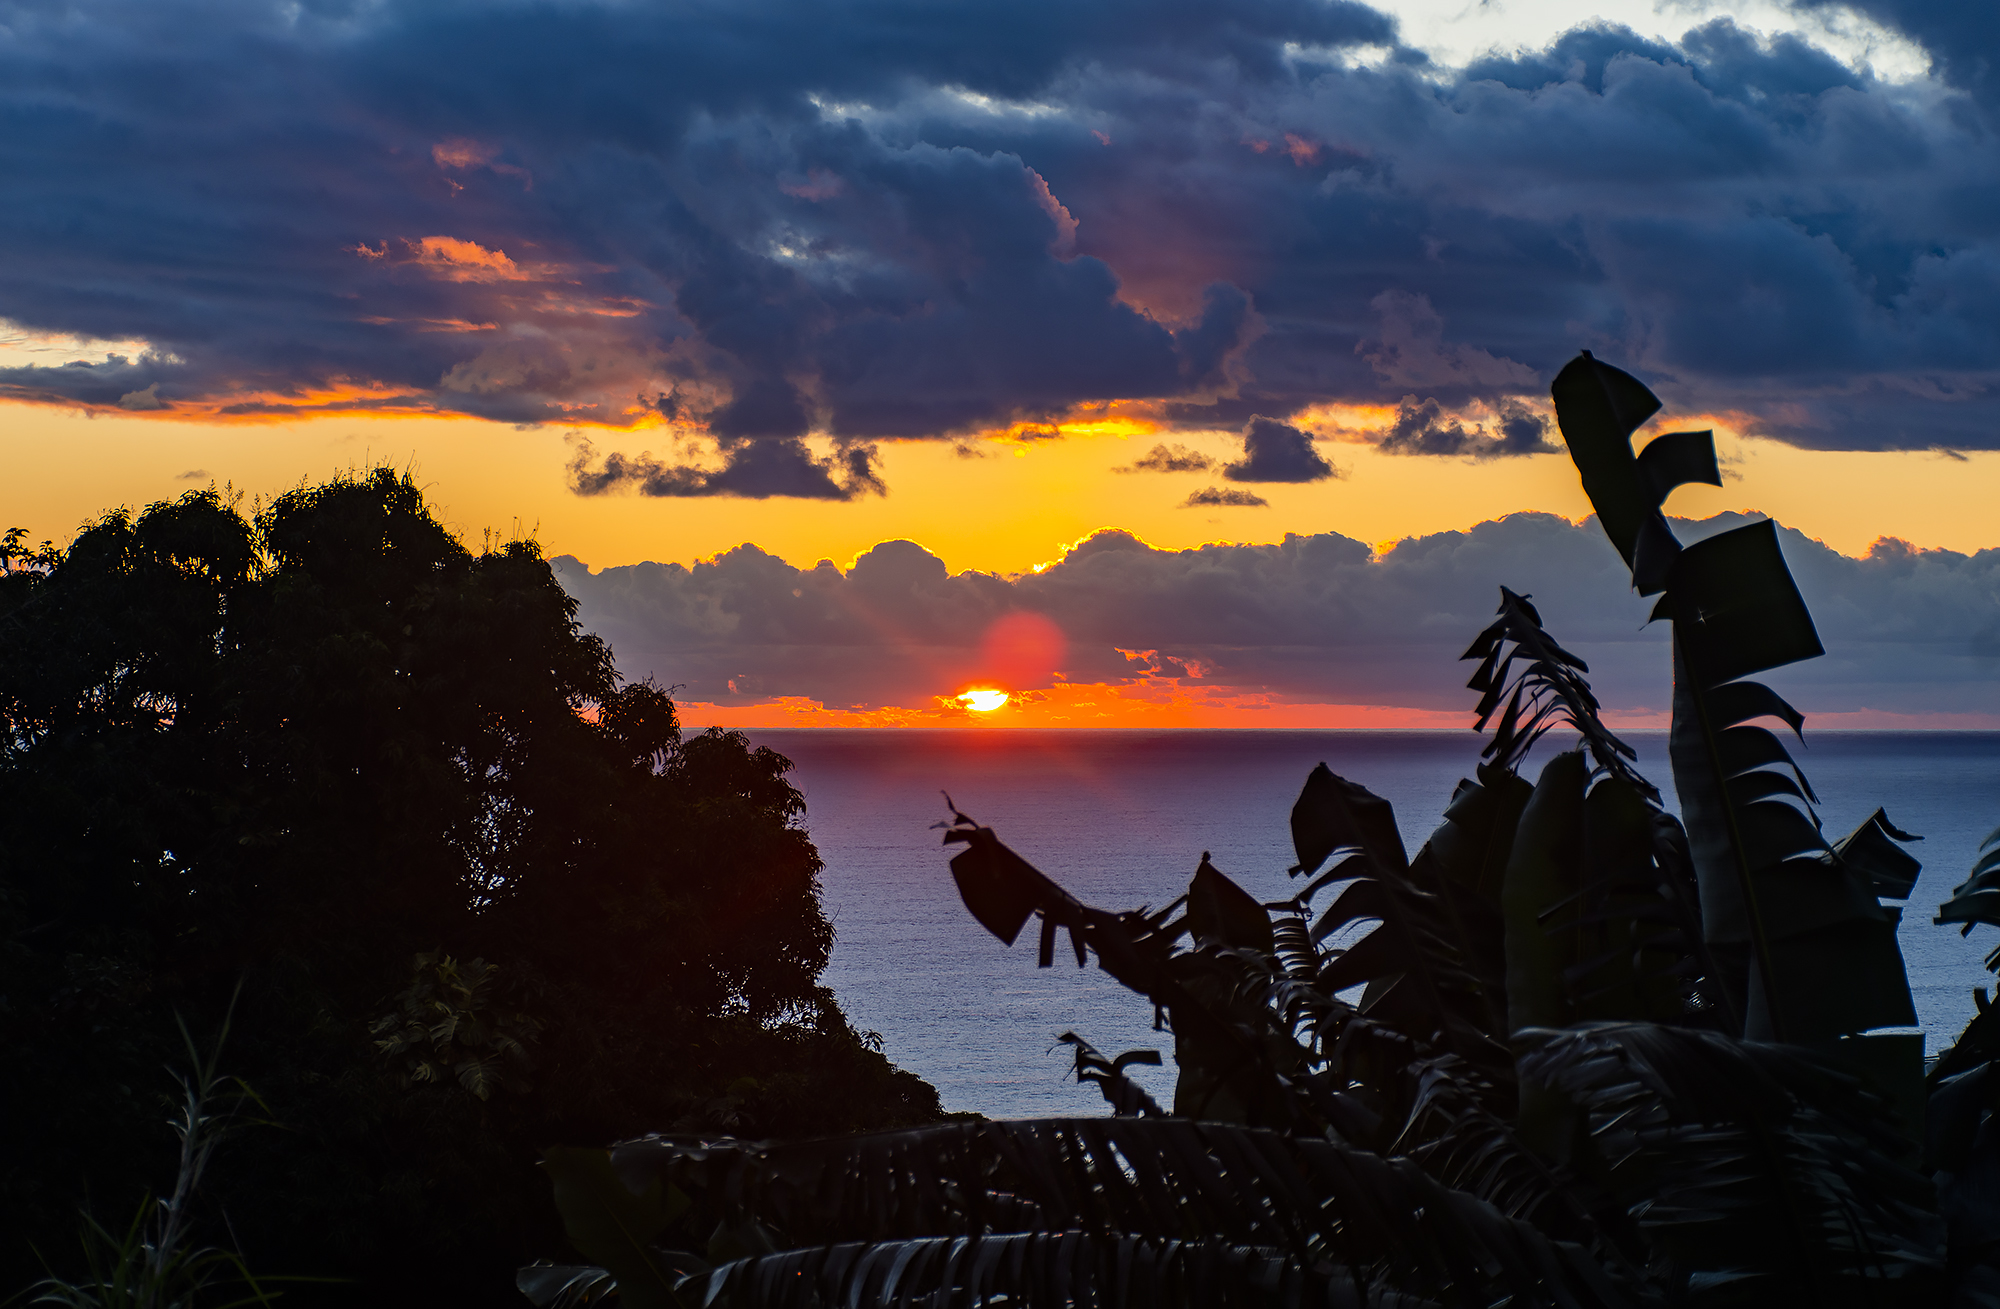 sun rising over ocean with green foliage in foreground